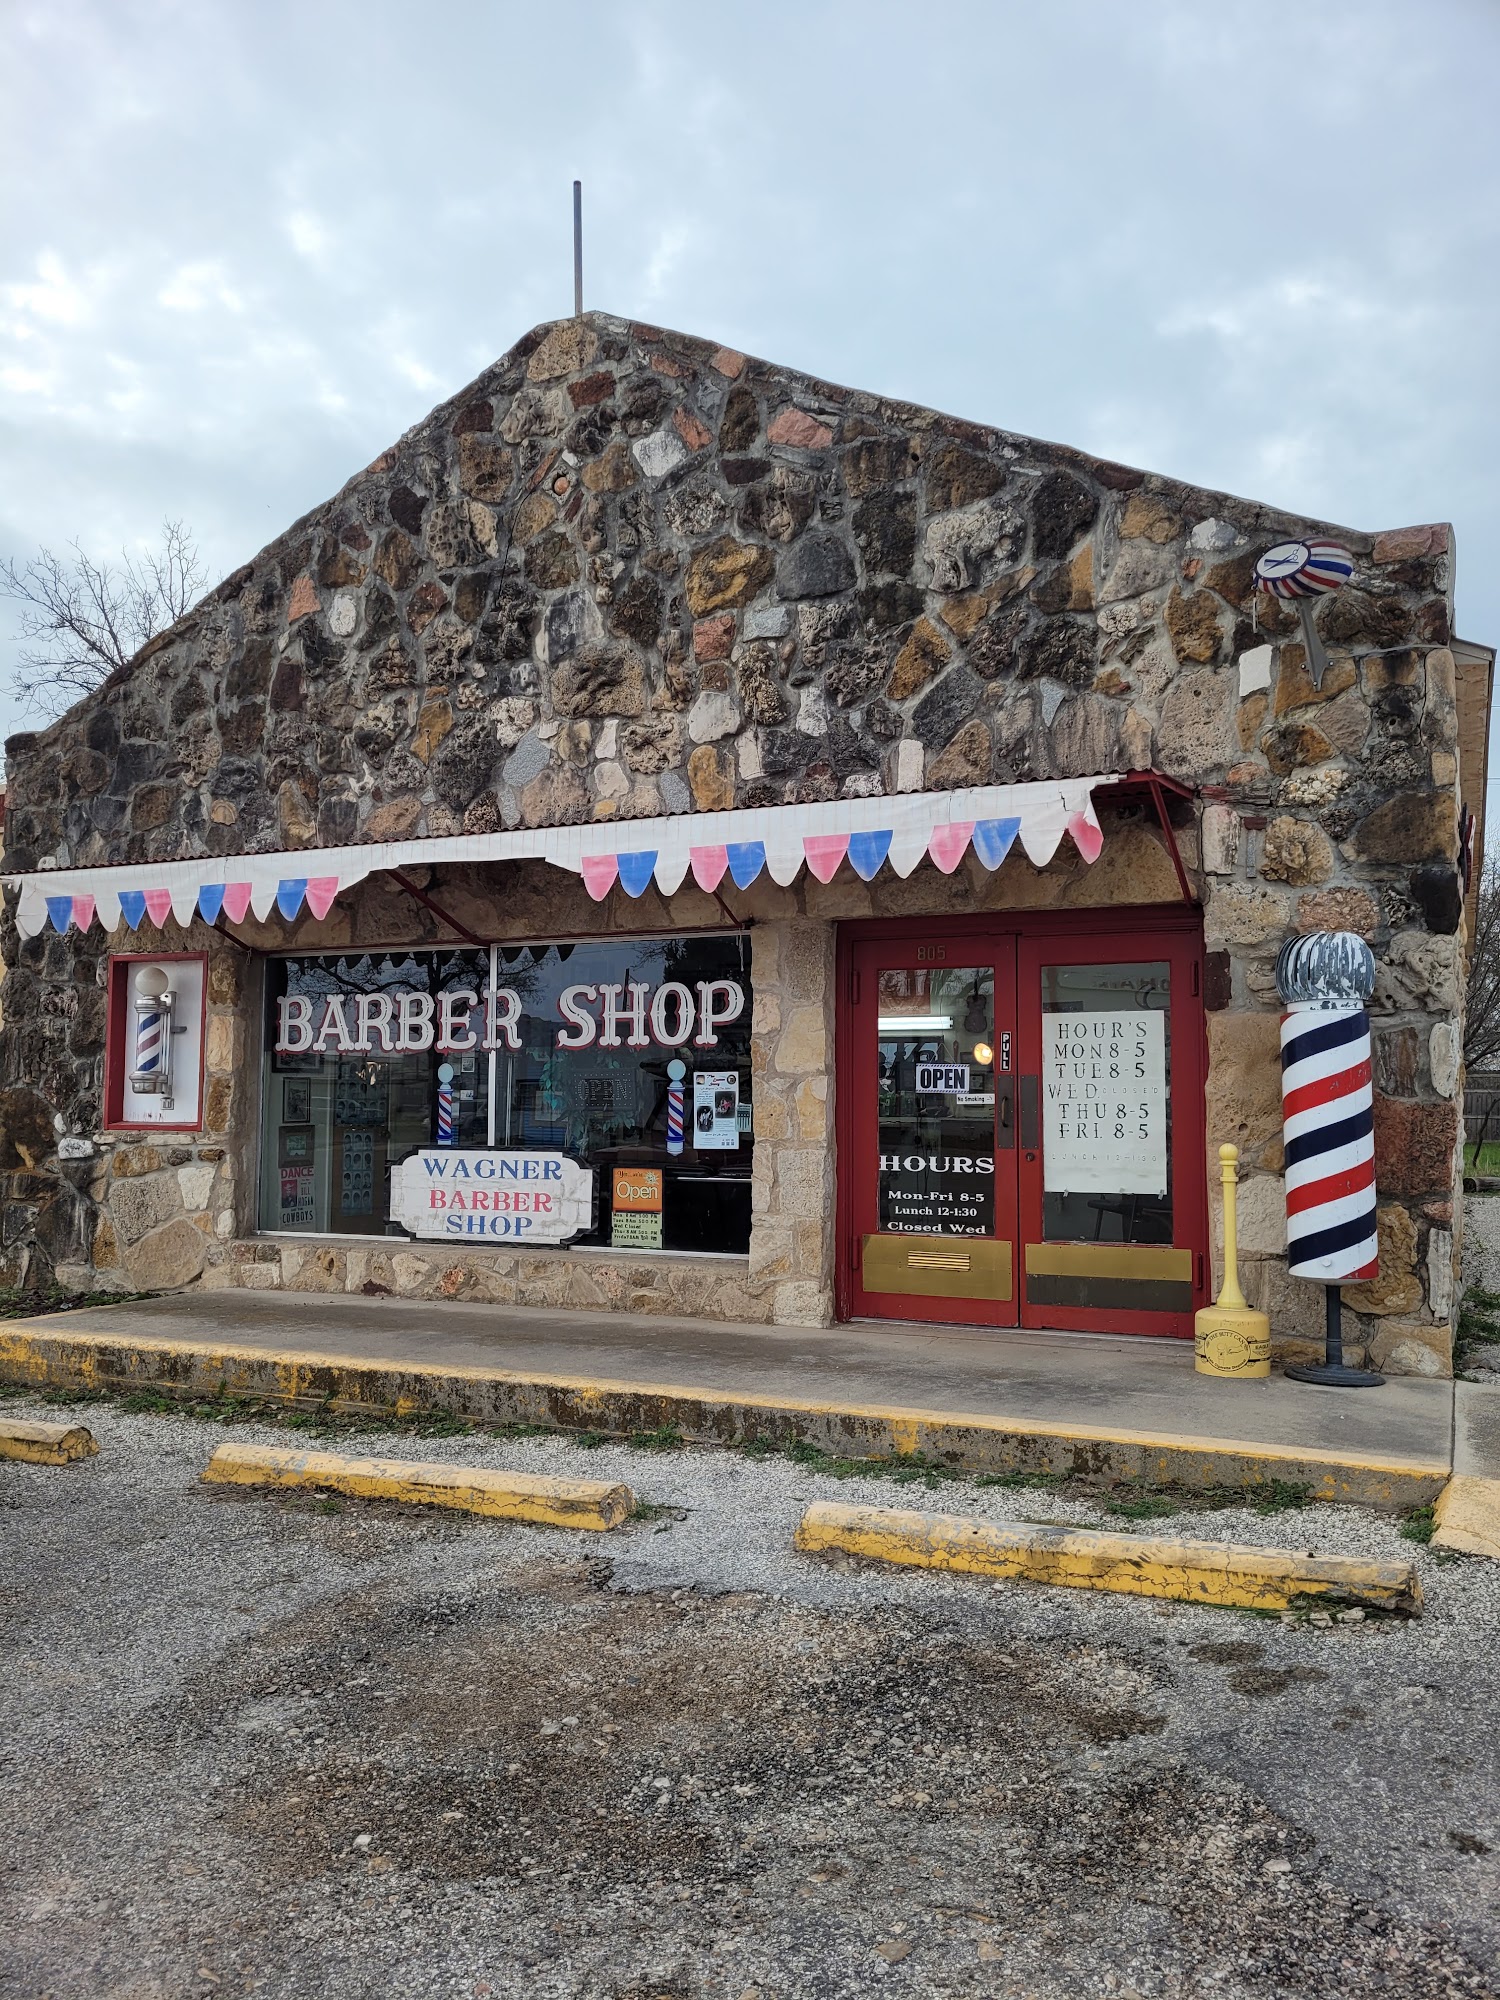 Wagner Stylists Barber Shop 805 Main St, Junction Texas 76849